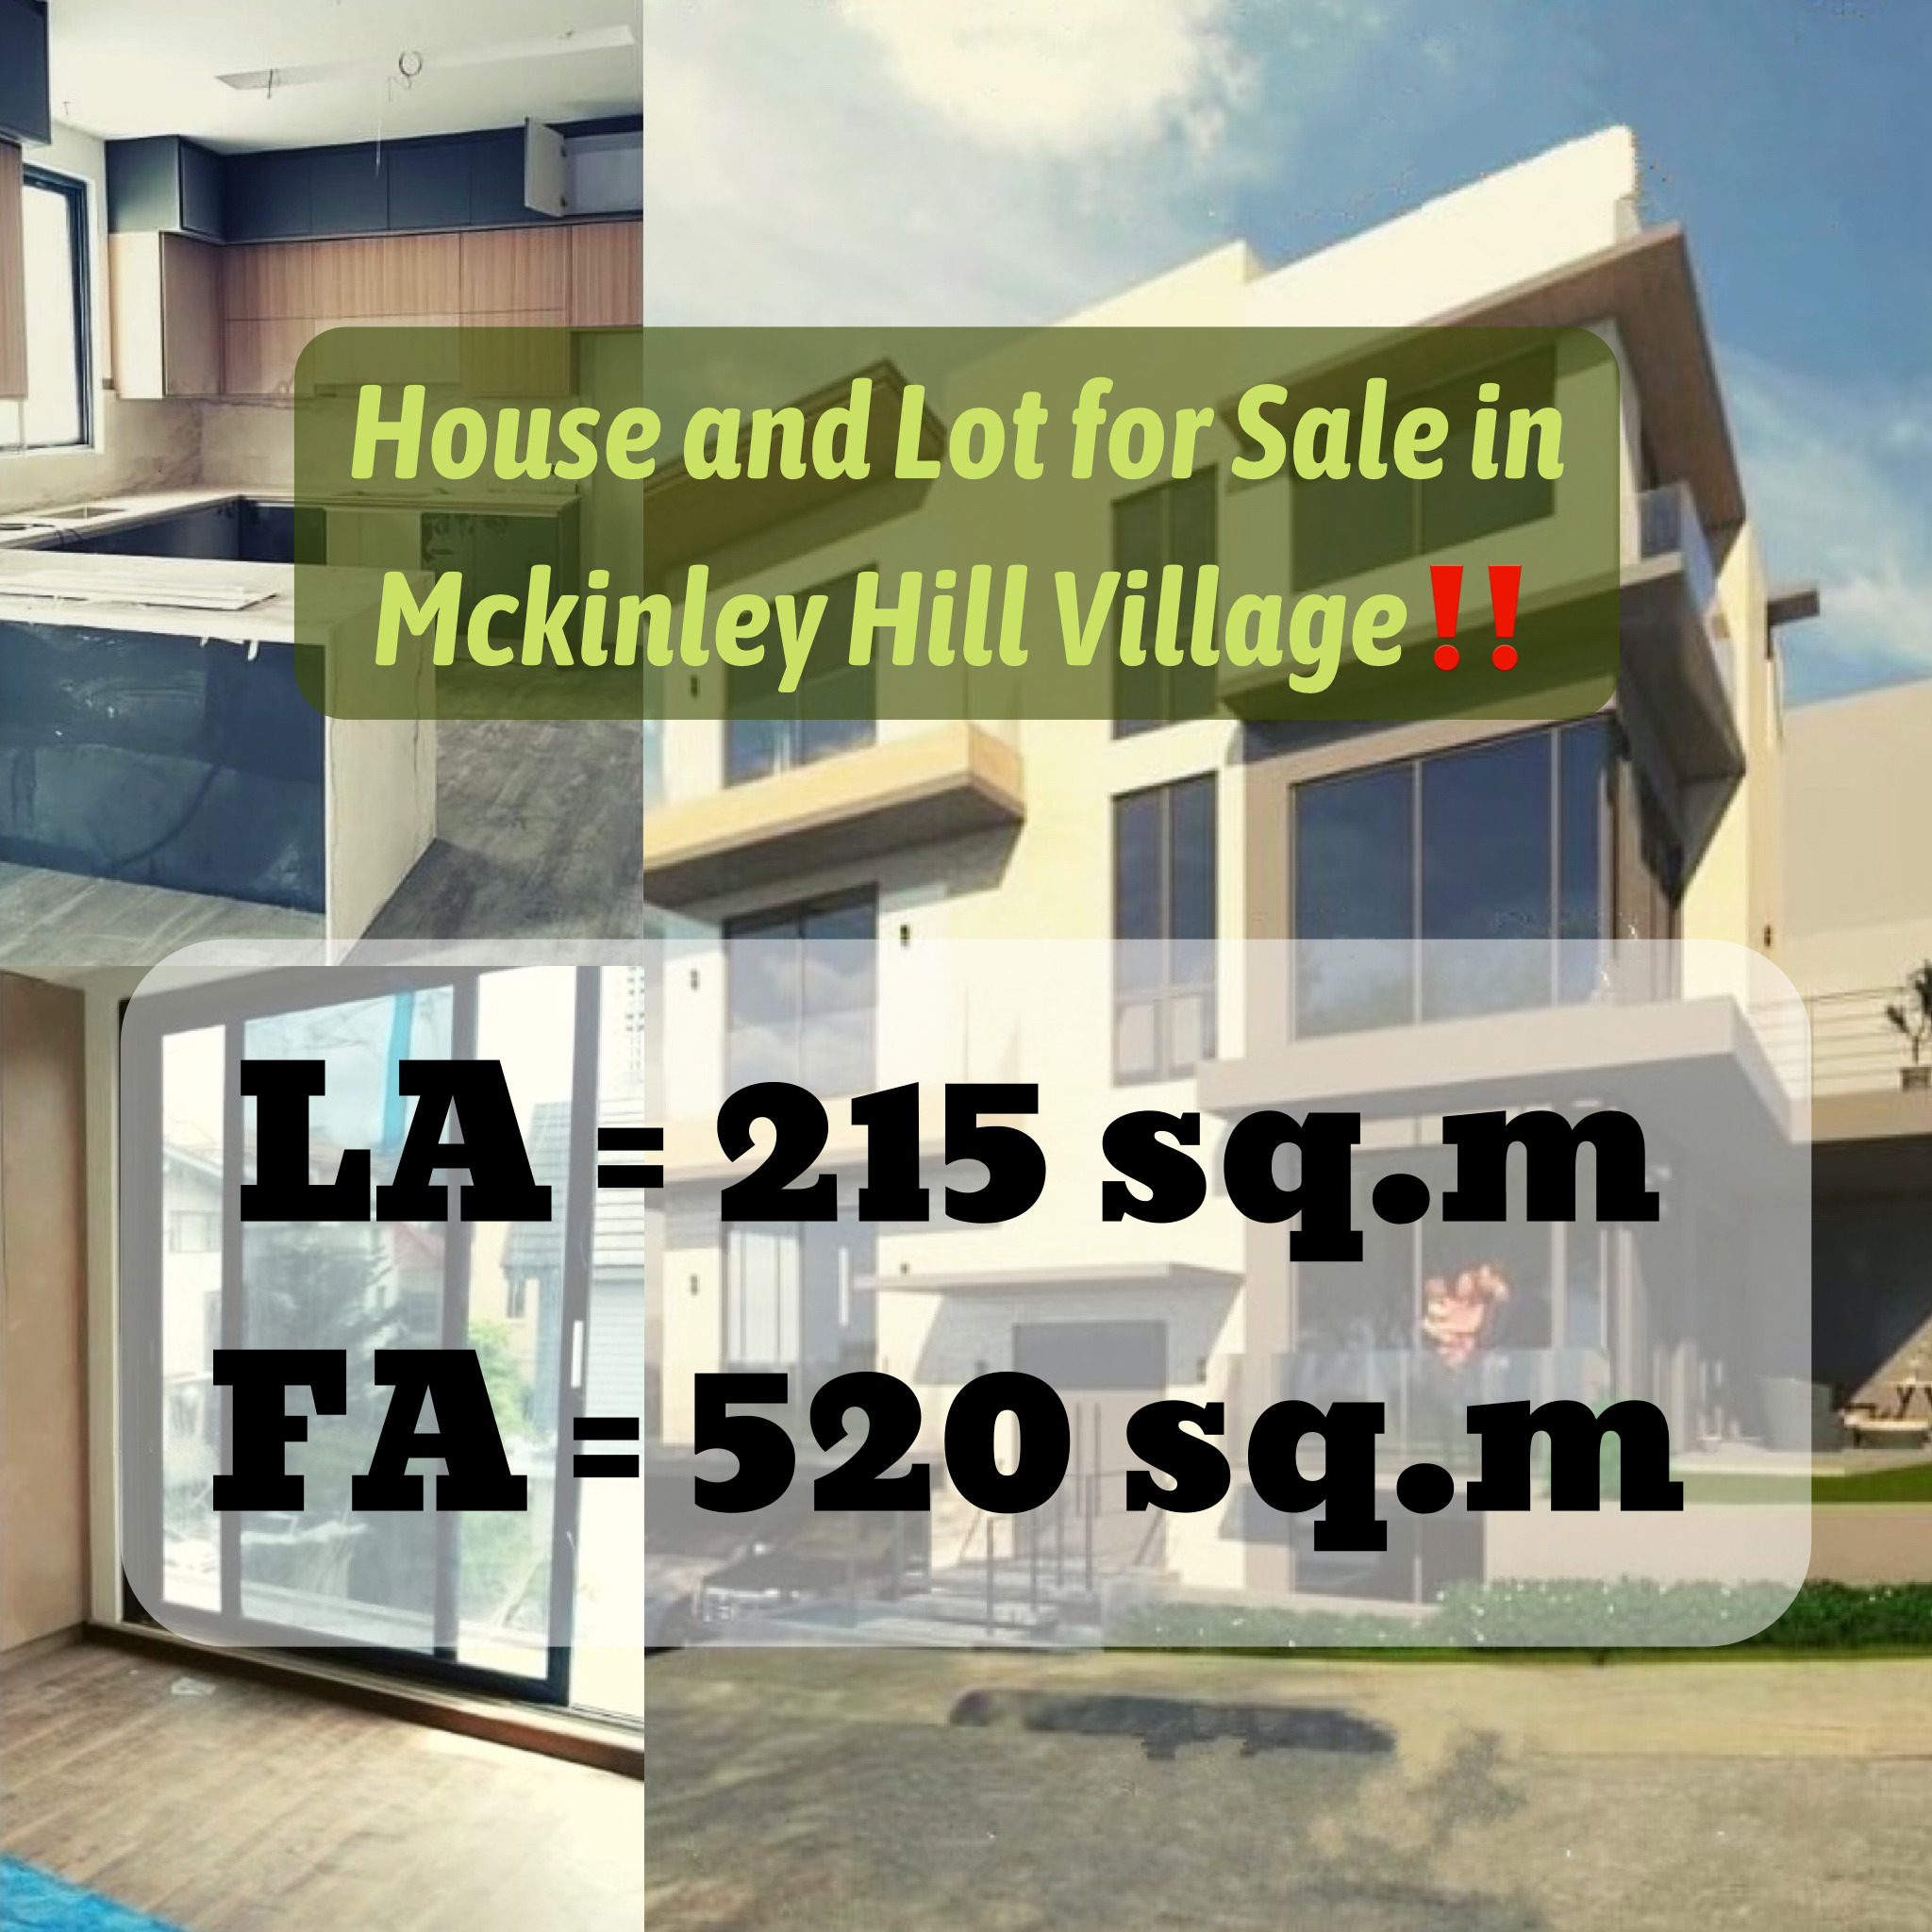 House and Lot for Sale in Mckinley Hill Village‼️